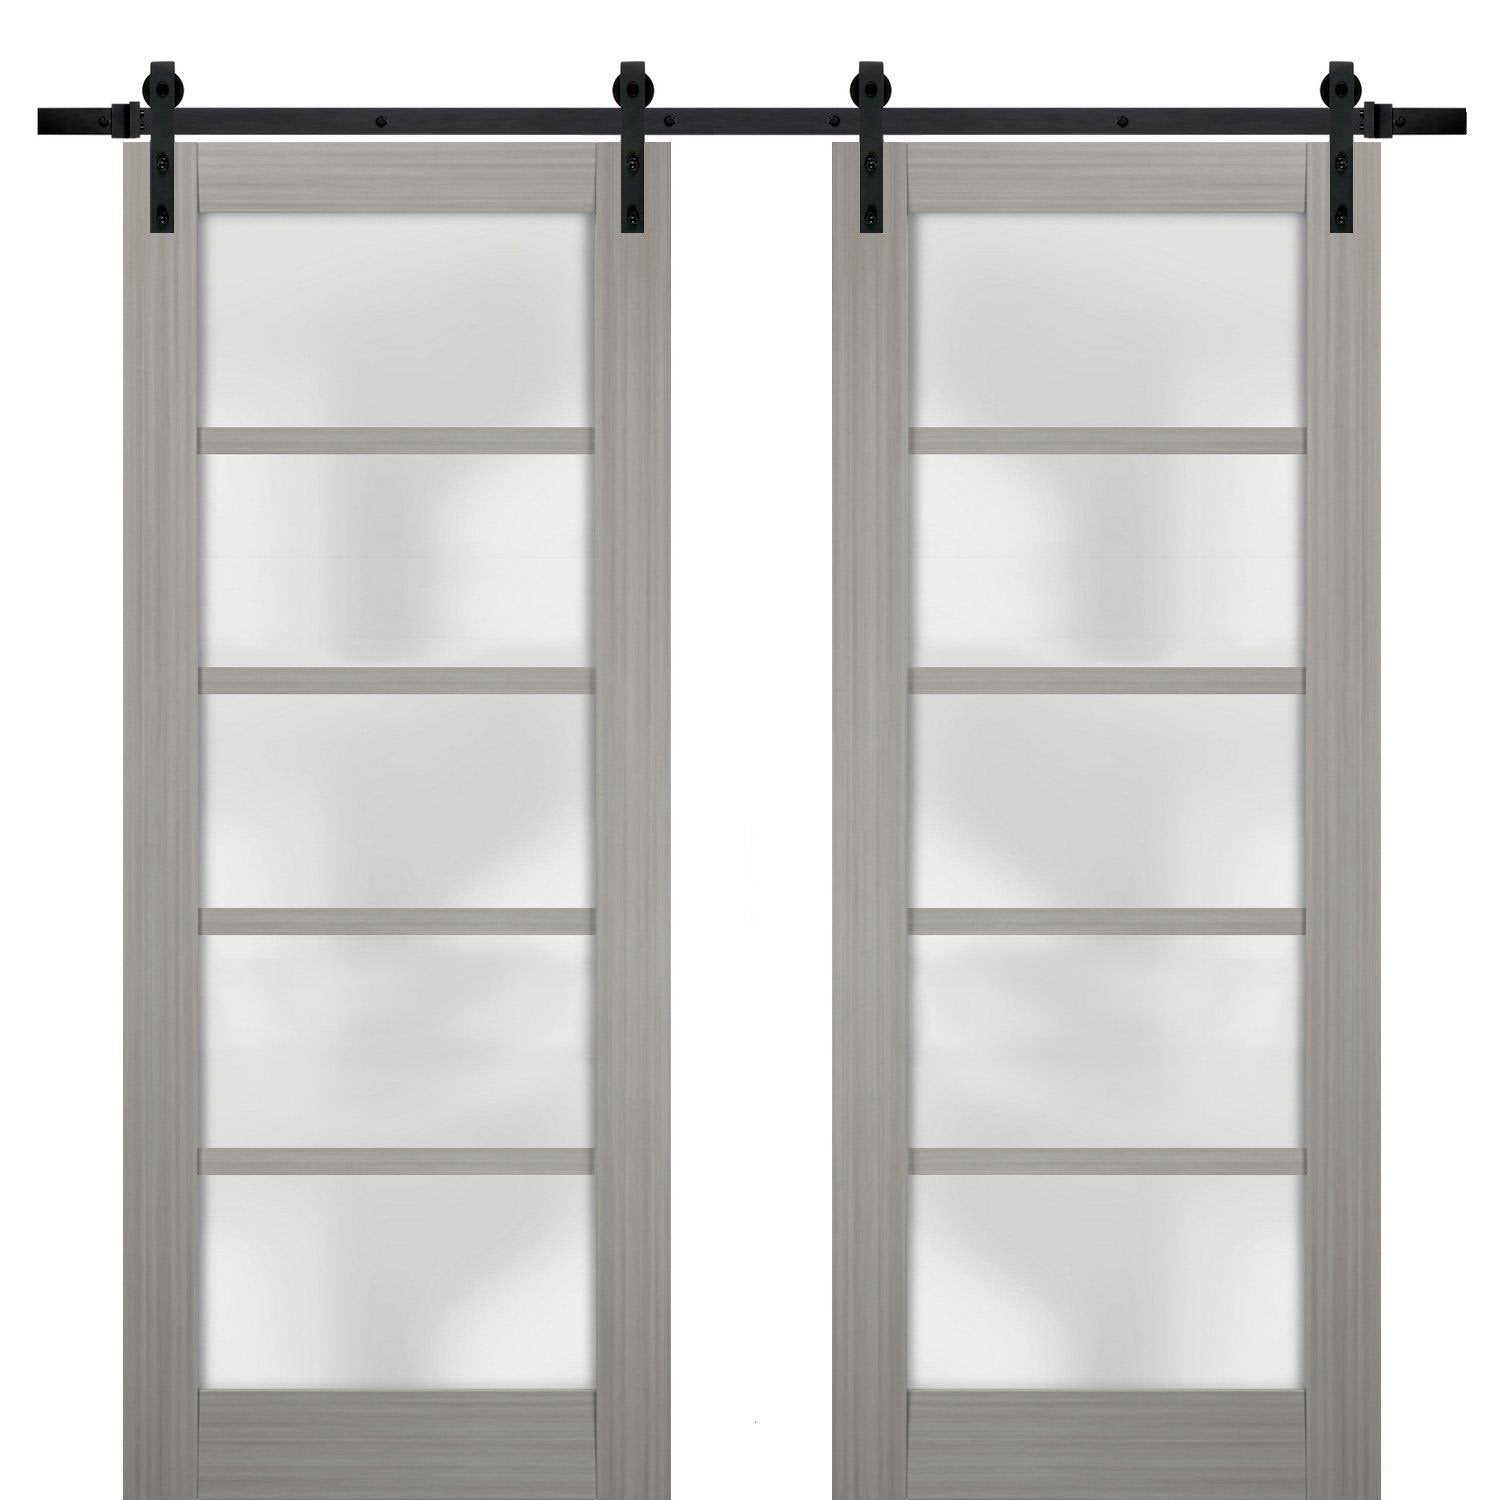 Quadro 4002 Grey Ash Double Barn Door with Frosted Glass | Black Rail